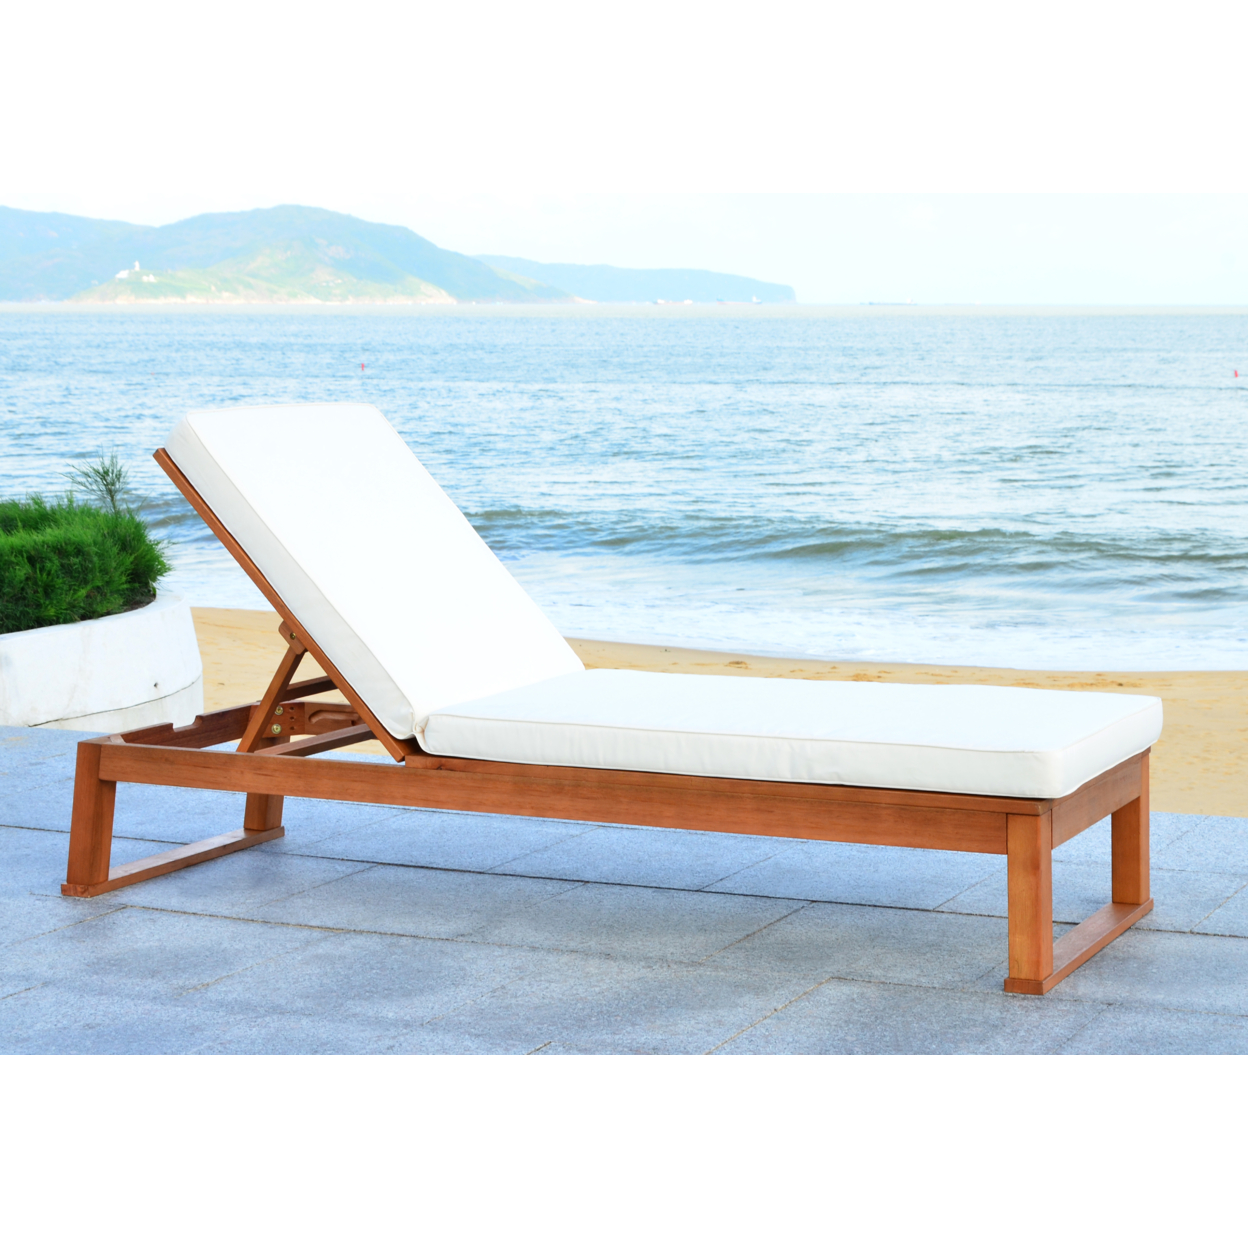 SAFAVIEH Outdoor Collection Solano Chaise Sunlounger Natural/Beige